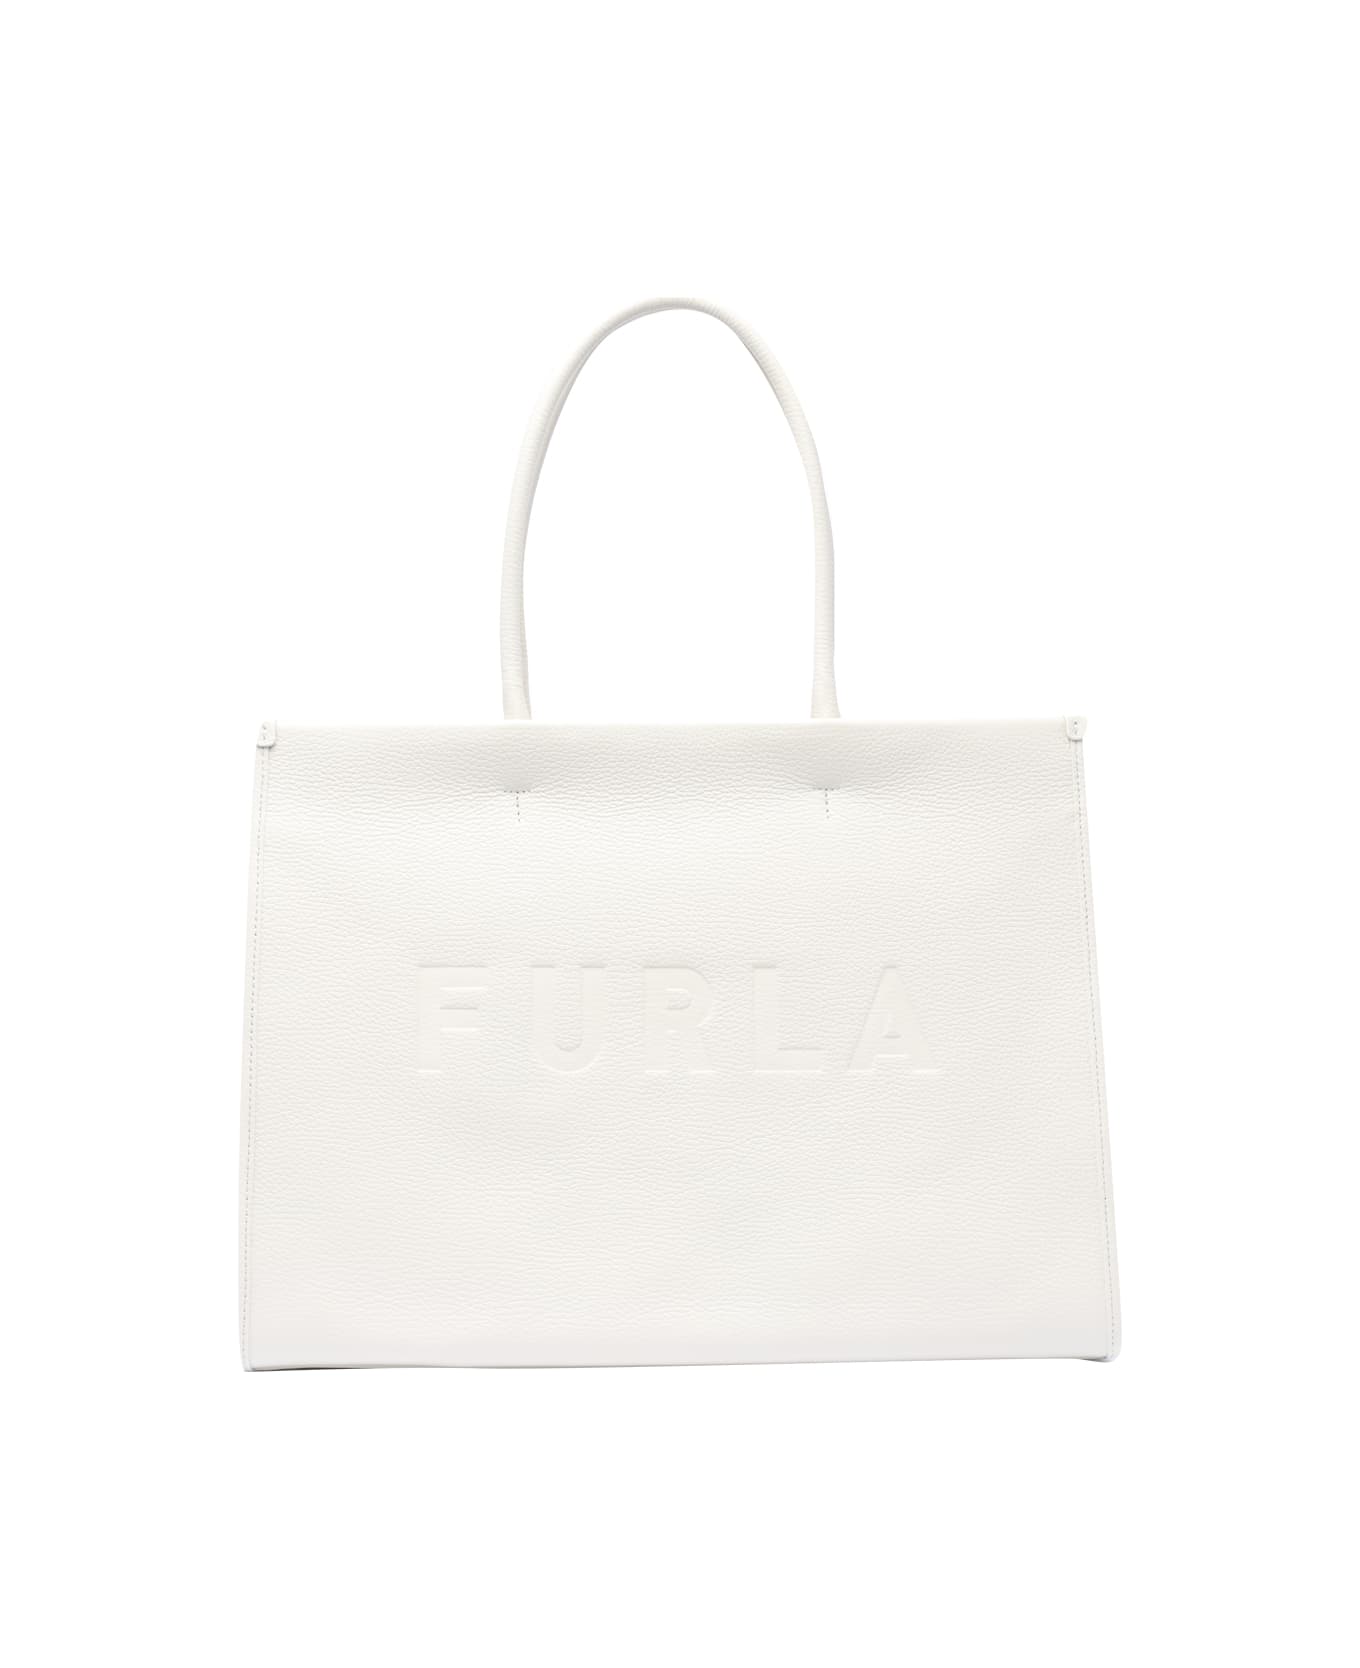 Furla Opportunity Tote Bag - White トートバッグ